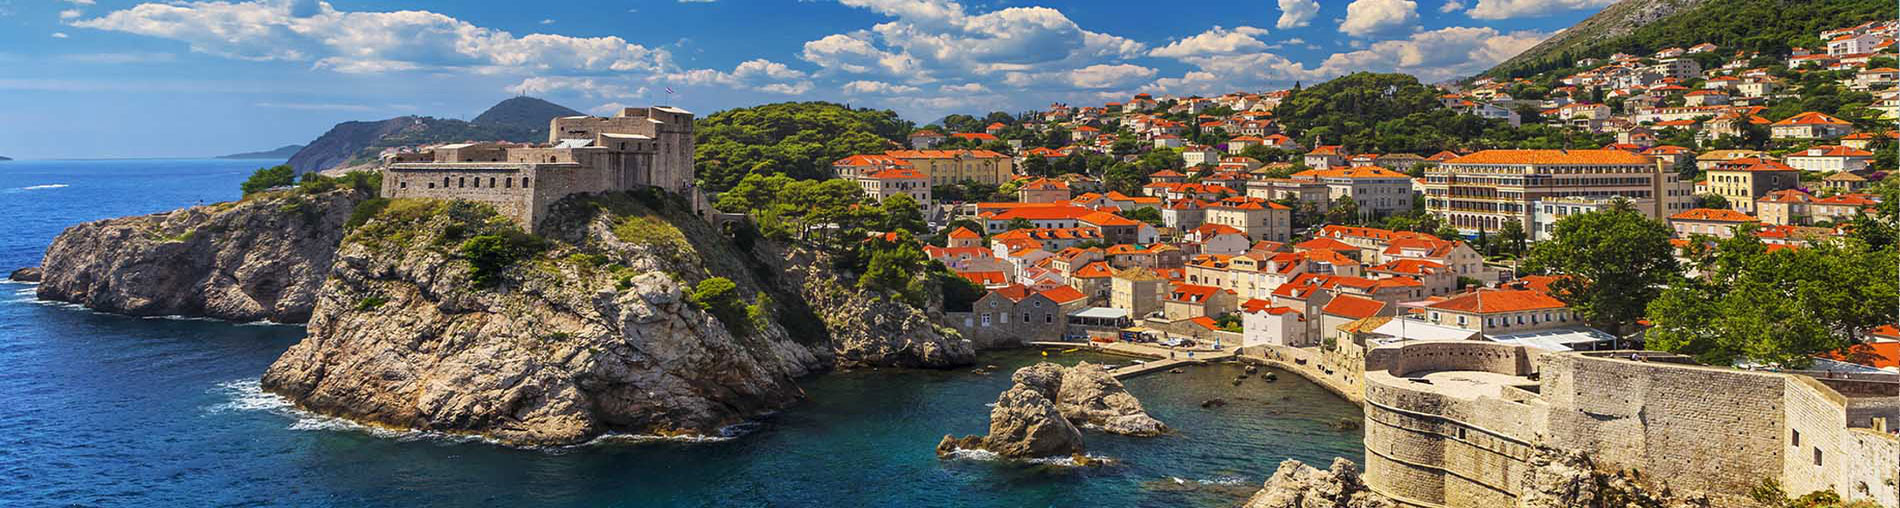 Croatia Adventure Tour Package From India